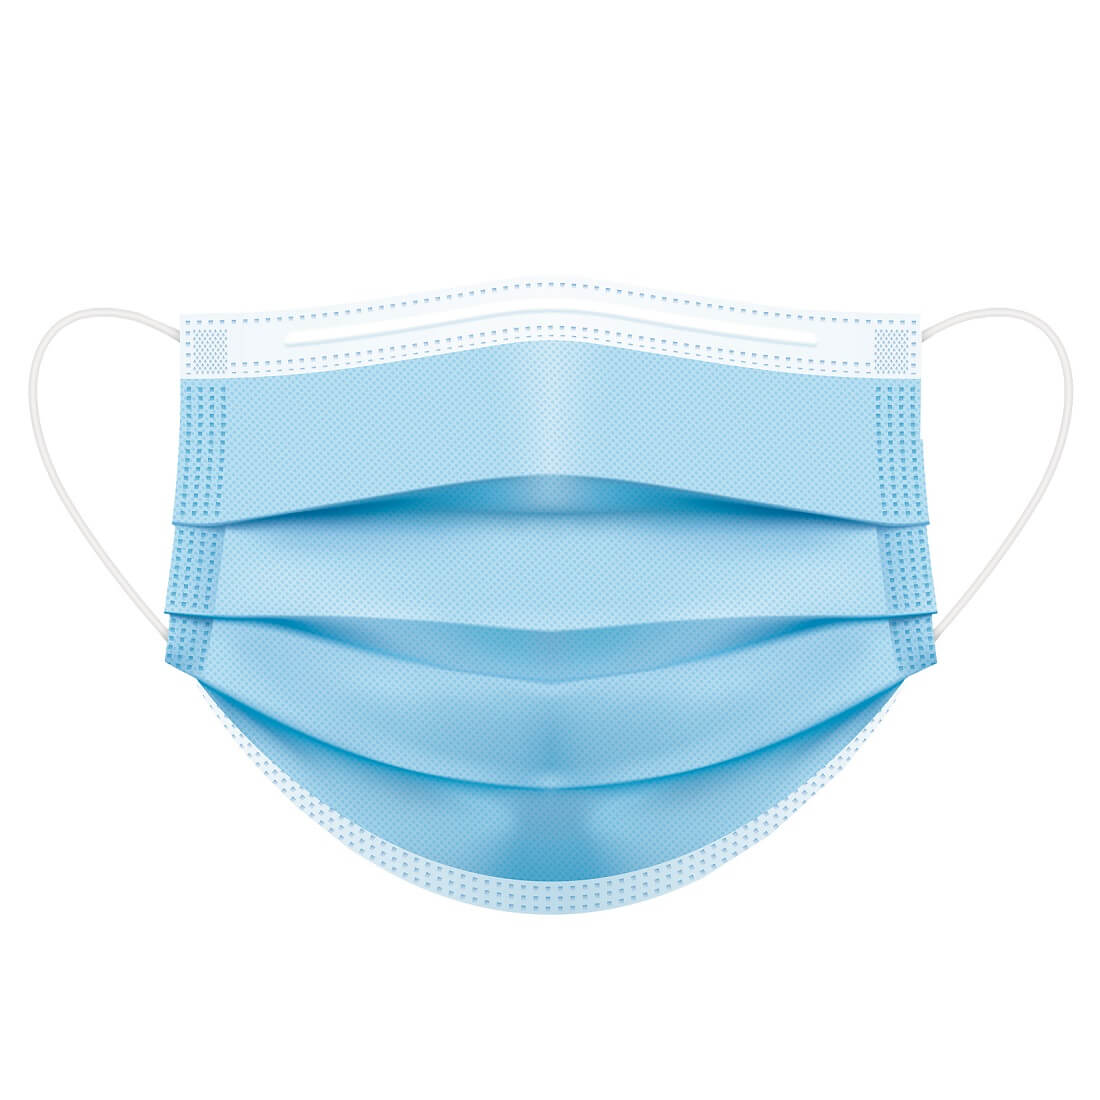 Medical Mask Type IIR (Individually Wrapped) P030